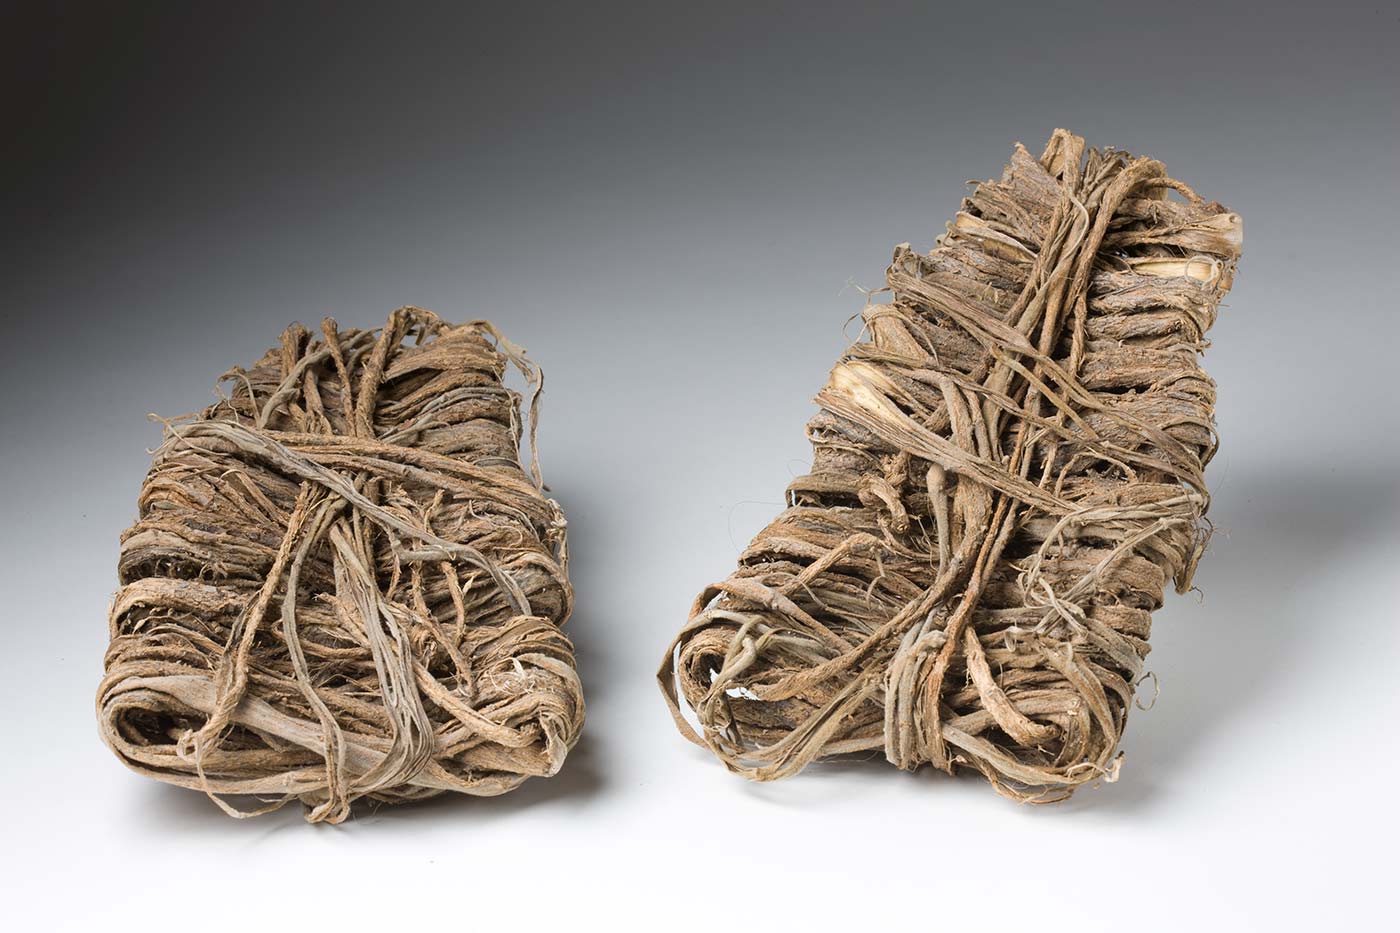 A pair of sandals made of plant fibre. They have a trapezoid shape and are made from strips of bark wrapped around and layered on top of each other. - click to view larger image